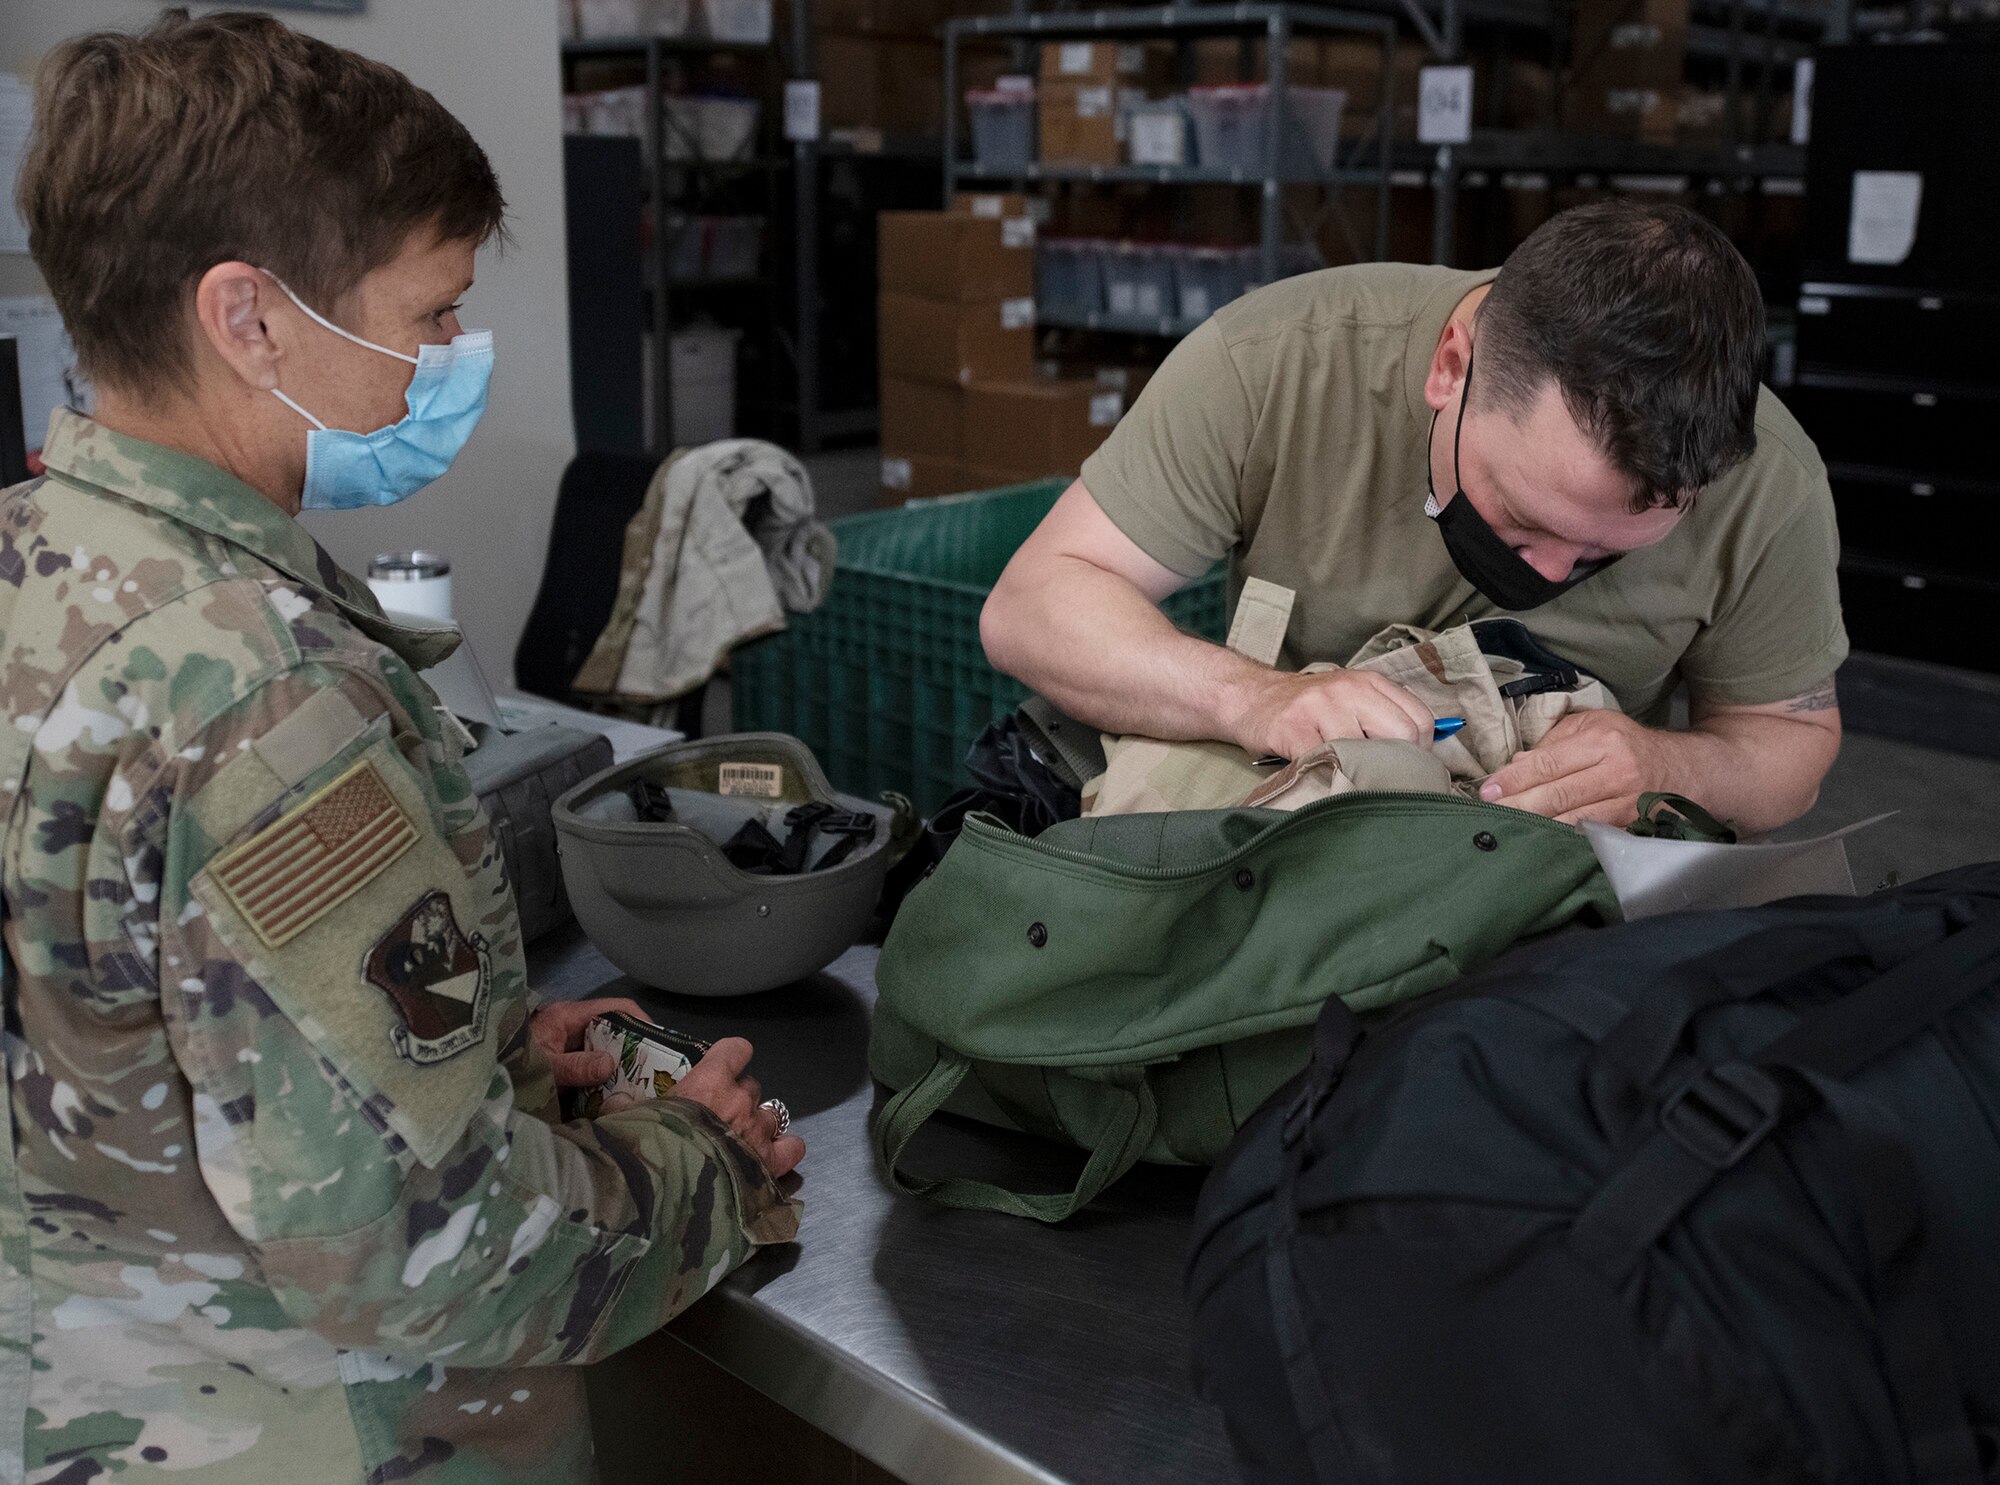 Photo of Airman issuing gear to another Airman